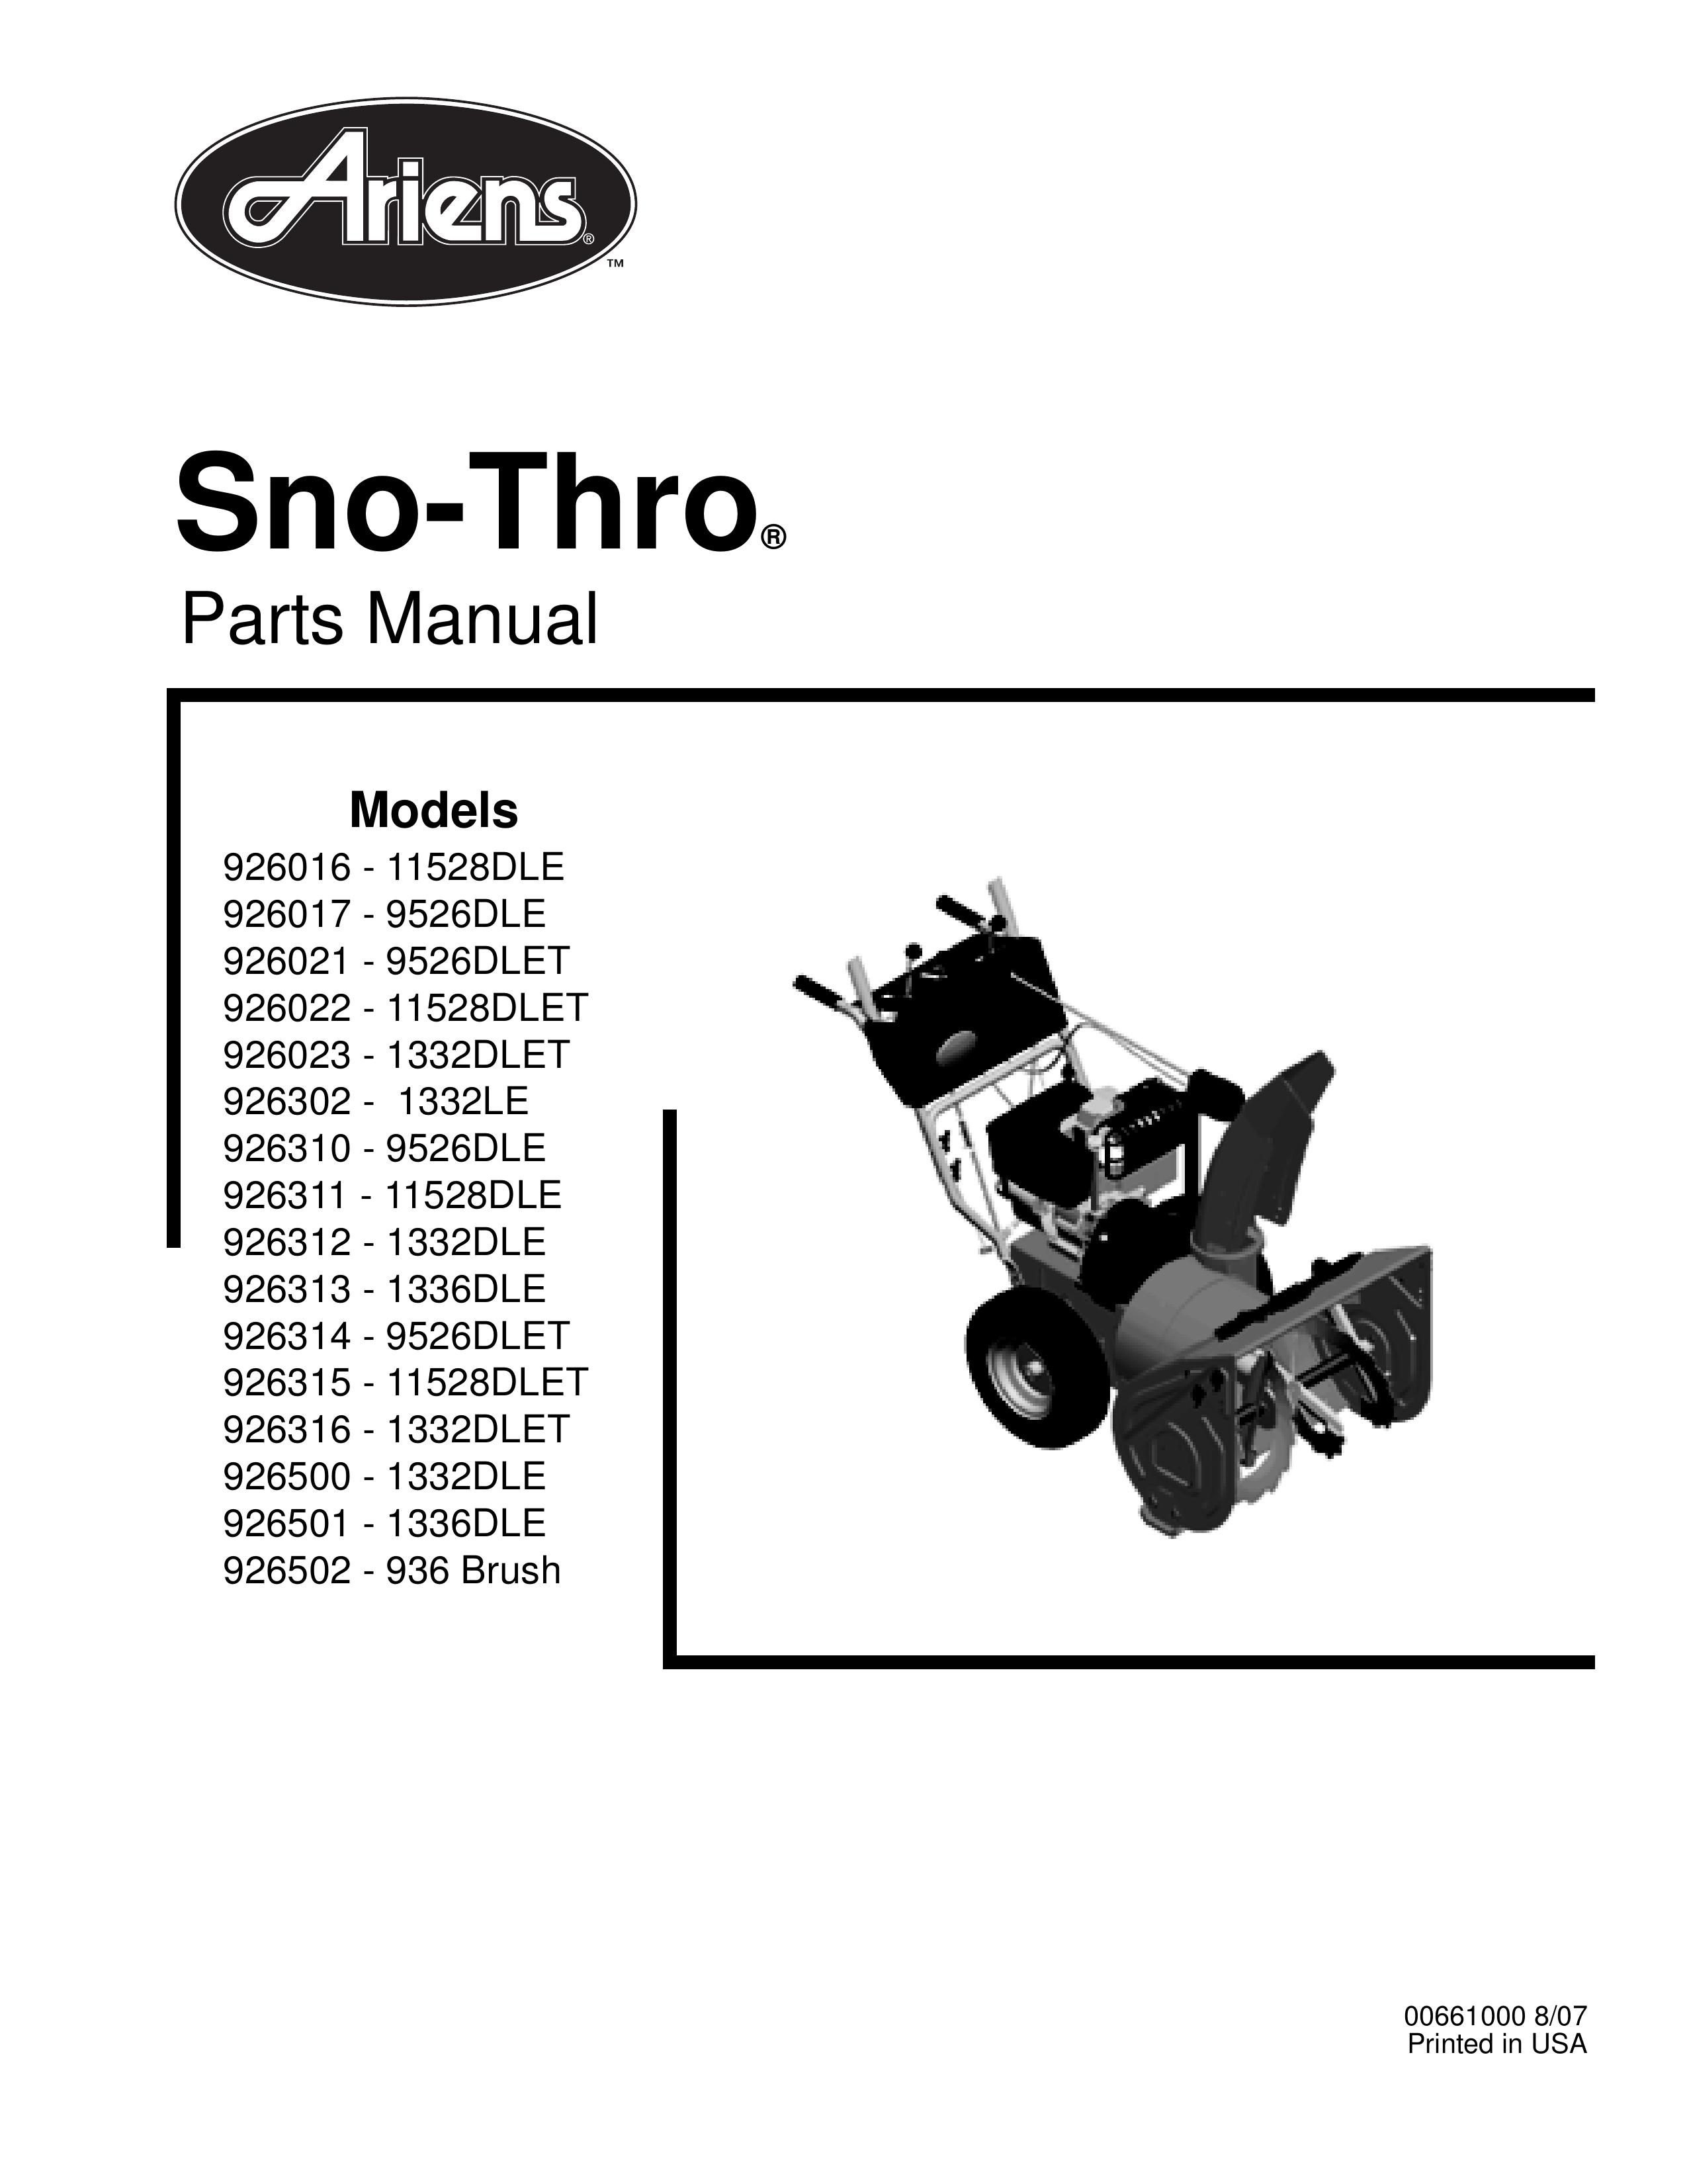 Ariens 926313 - 1336DLE Snow Blower Attachment User Manual